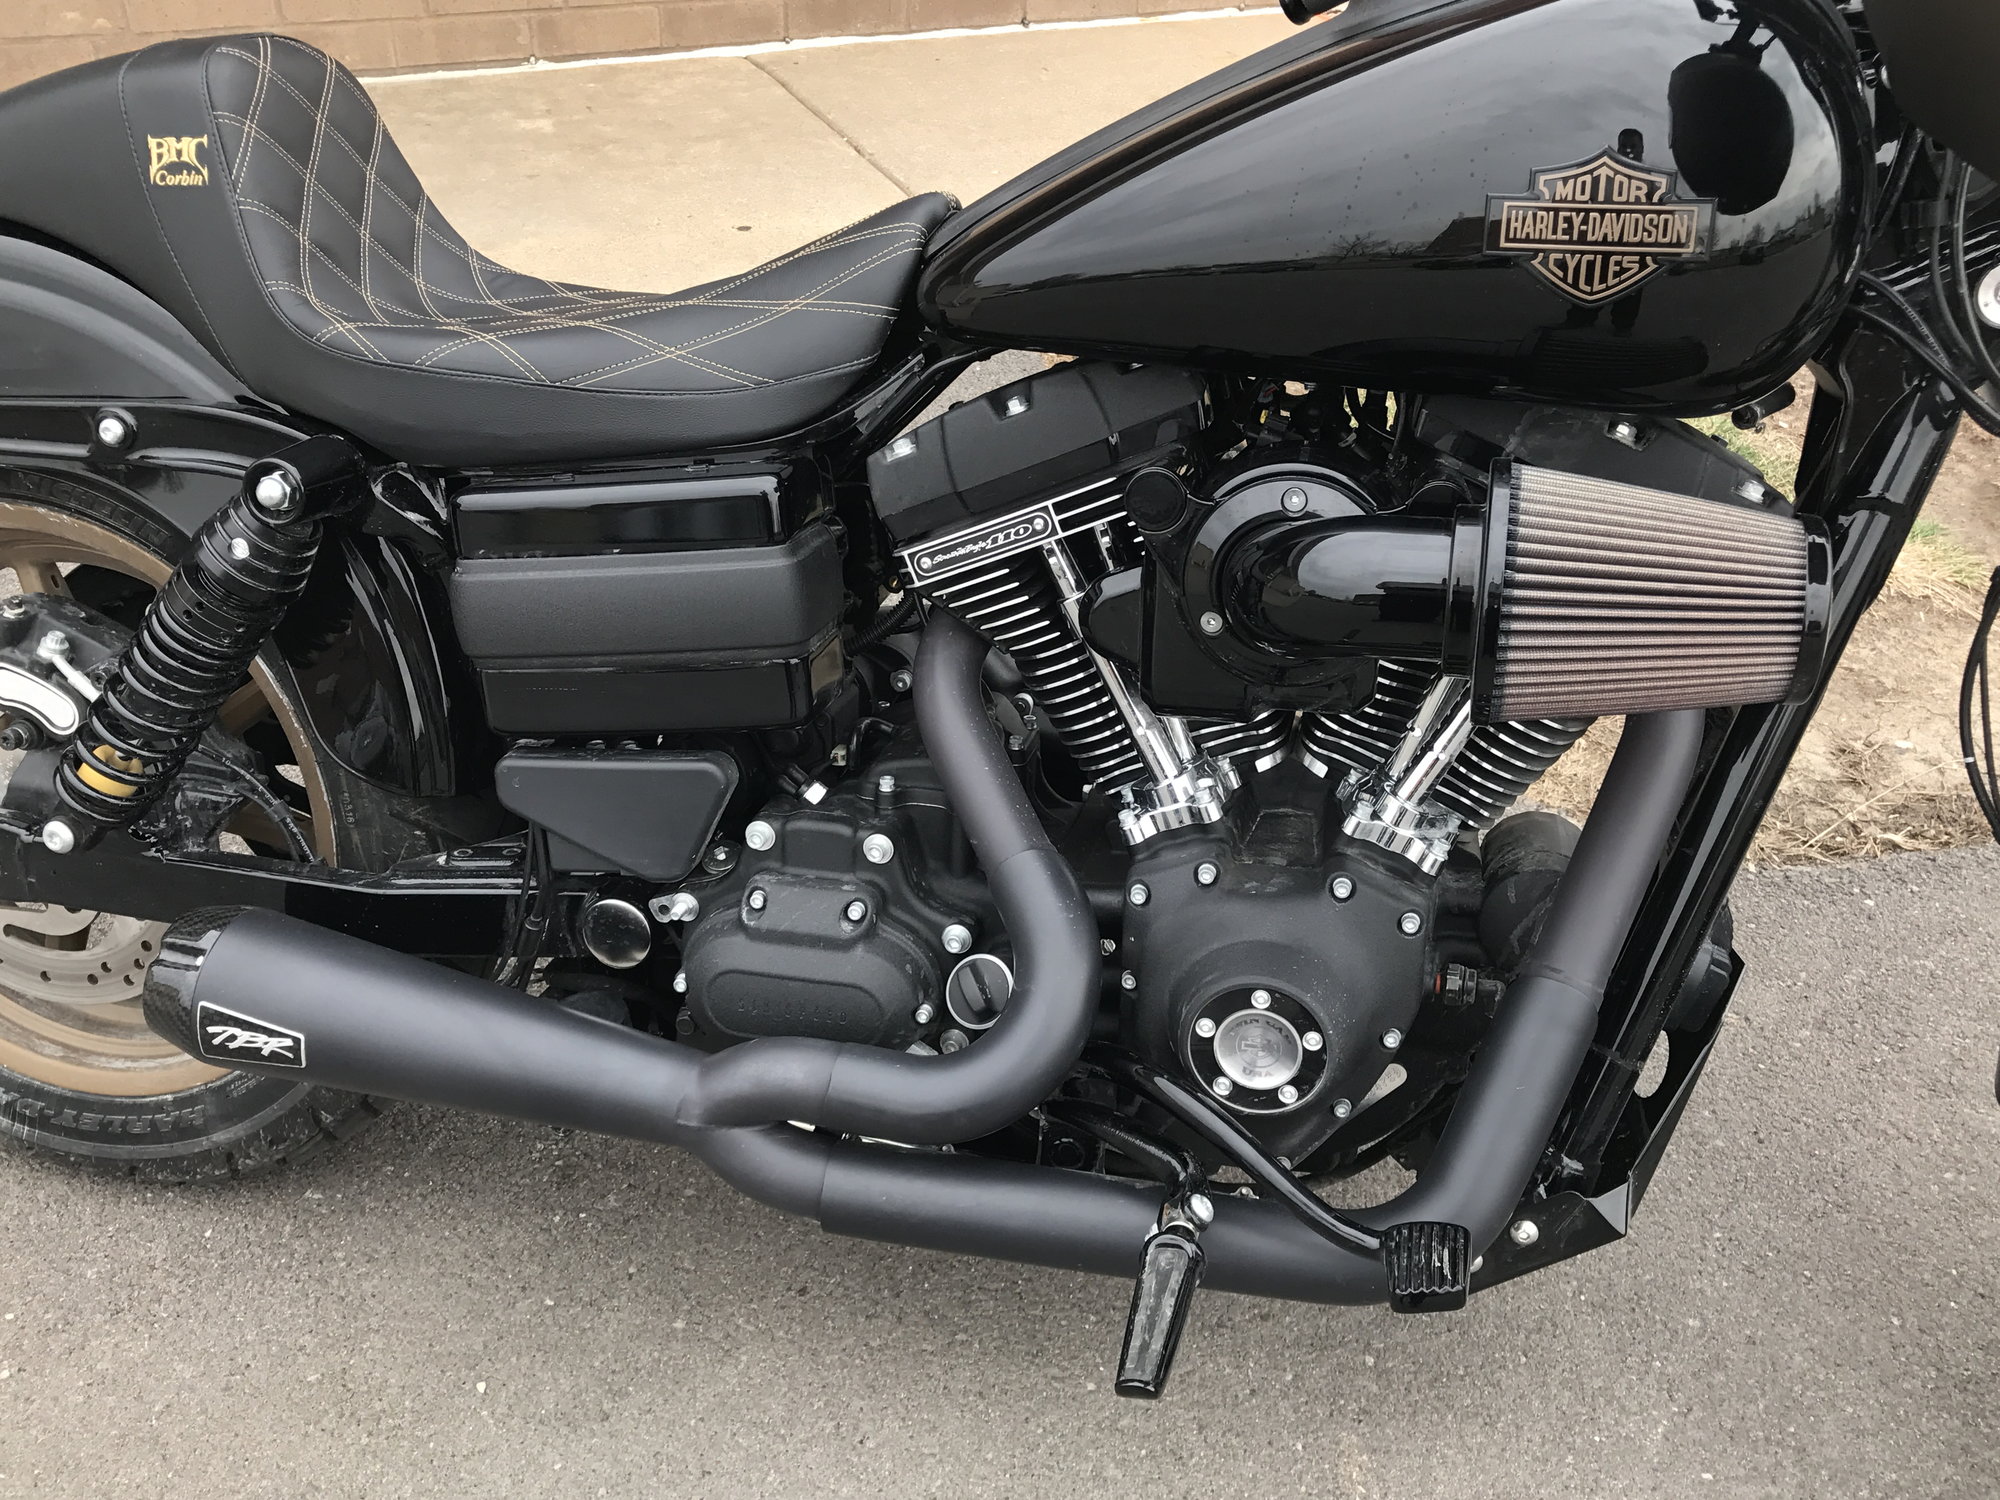 Exhaust poll - Lowrider S - Harley Davidson Forums